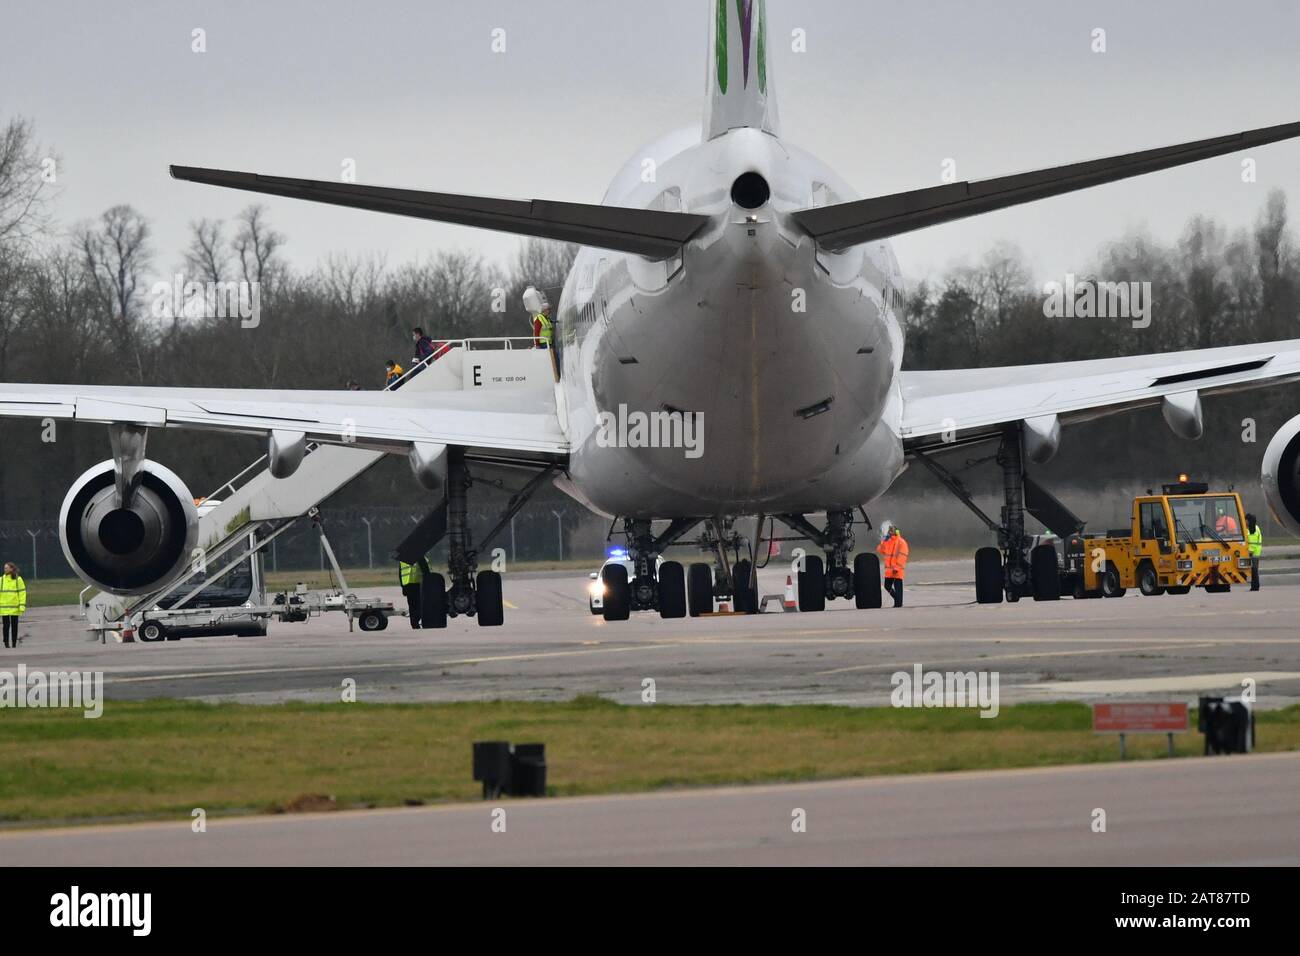 Passengers disembark from the plane carrying British nationals from the coronavirus-hit city of Wuhan in China, arrives at RAF Brize Norton in Oxfordshire. PA Photo. Picture date: Friday January 31, 2020. See PA story HEALTH Coronavirus. Photo credit should read: Ben Birchall/PA Wire Stock Photo